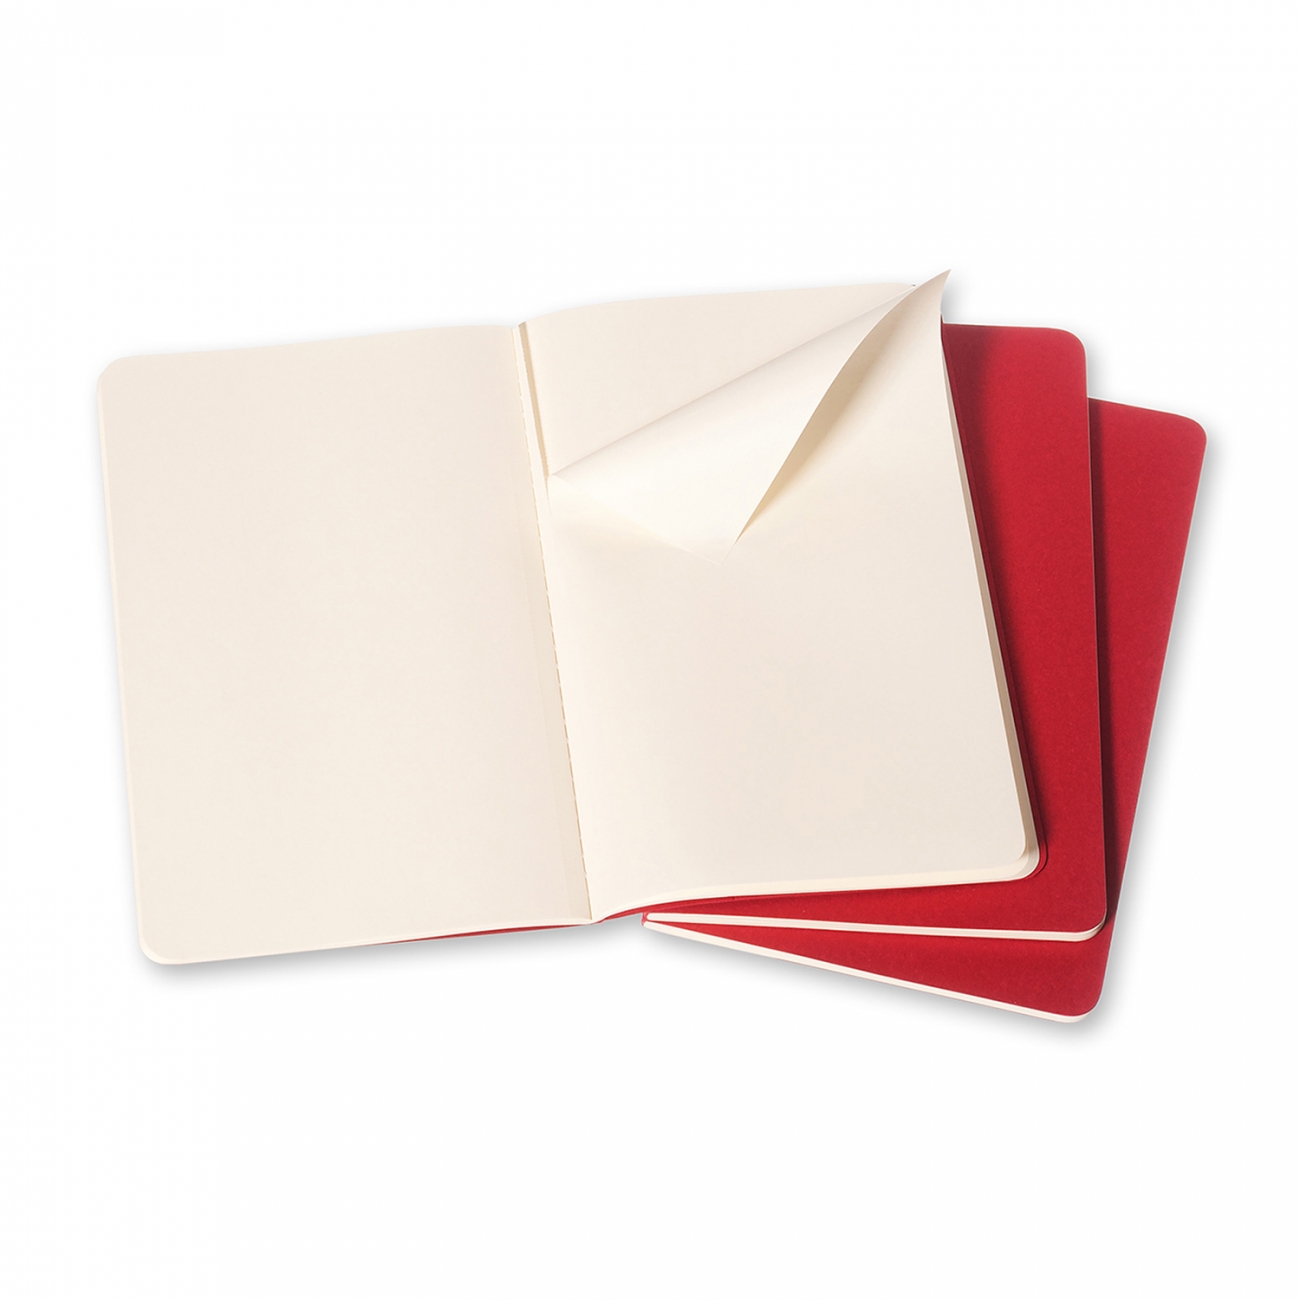 CAHIER NOTEBOOK - SET OF 3 - PLAIN - LARGE - CRANBERRY RED